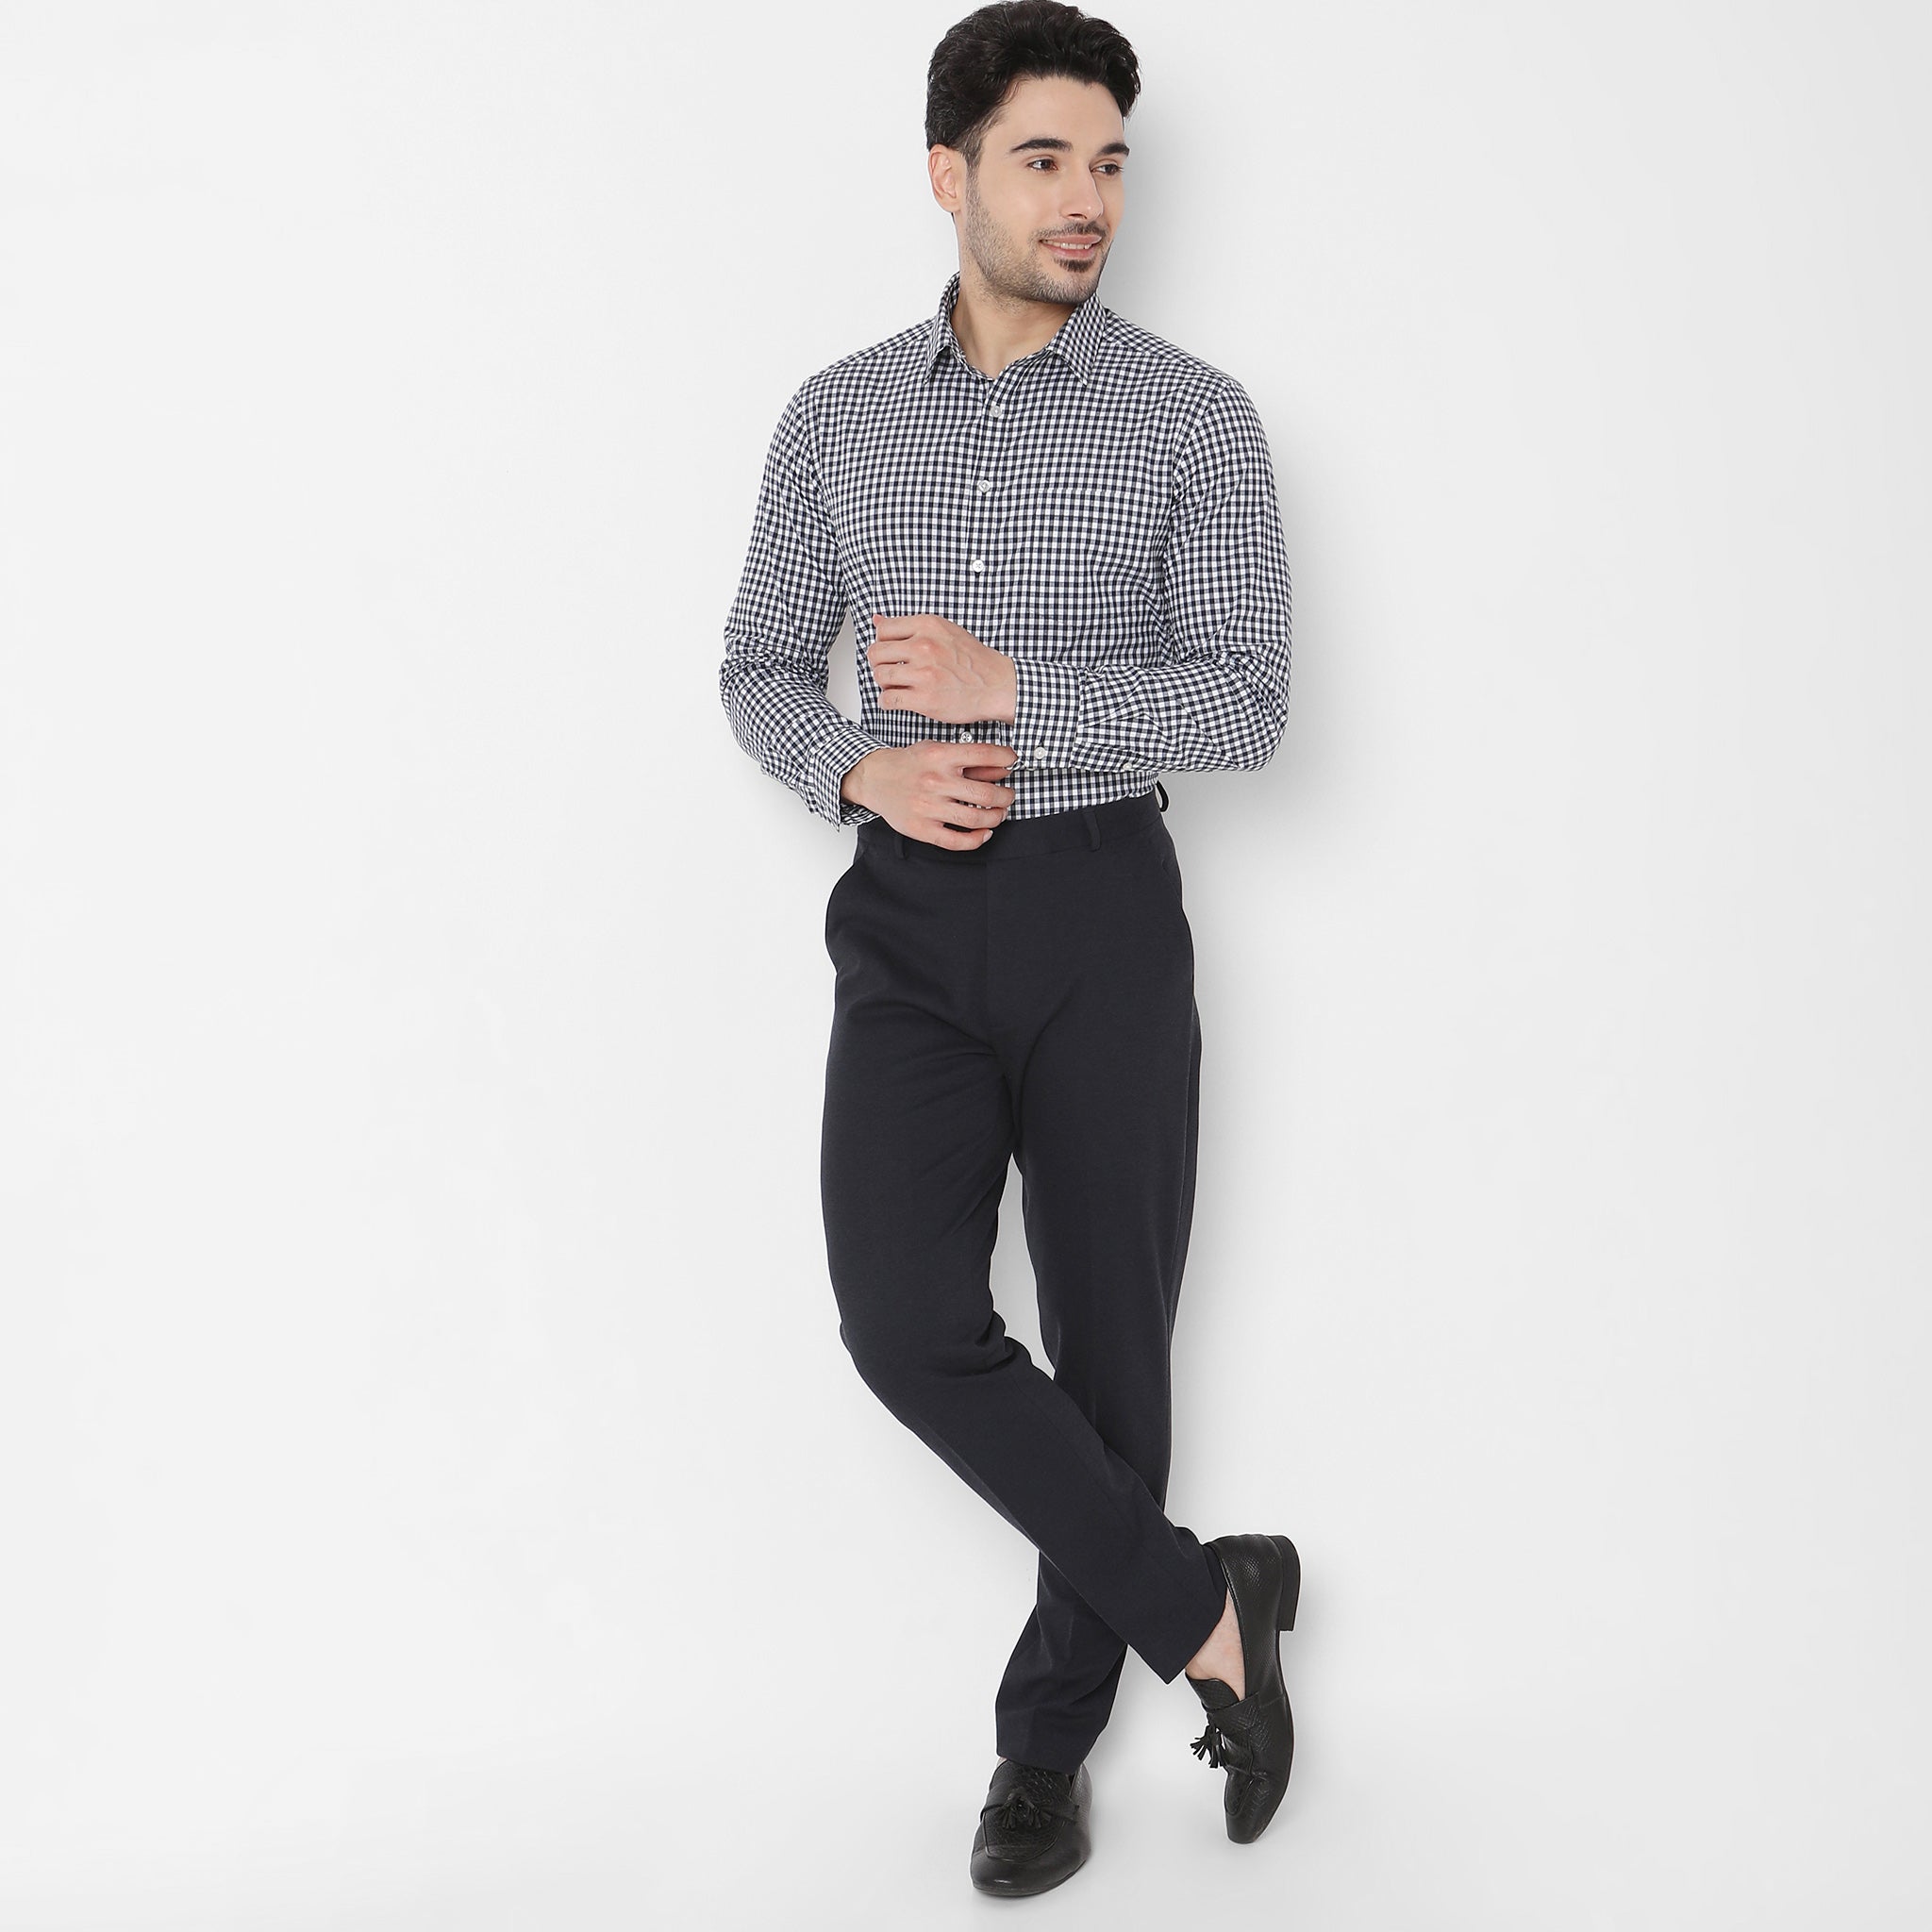 Korean Style Mens Casual Dress Formal Pants For Men Solid Color, Loose  Straight Fit, Office Formal Wear H11 230630 From Long01, $28.55 | DHgate.Com